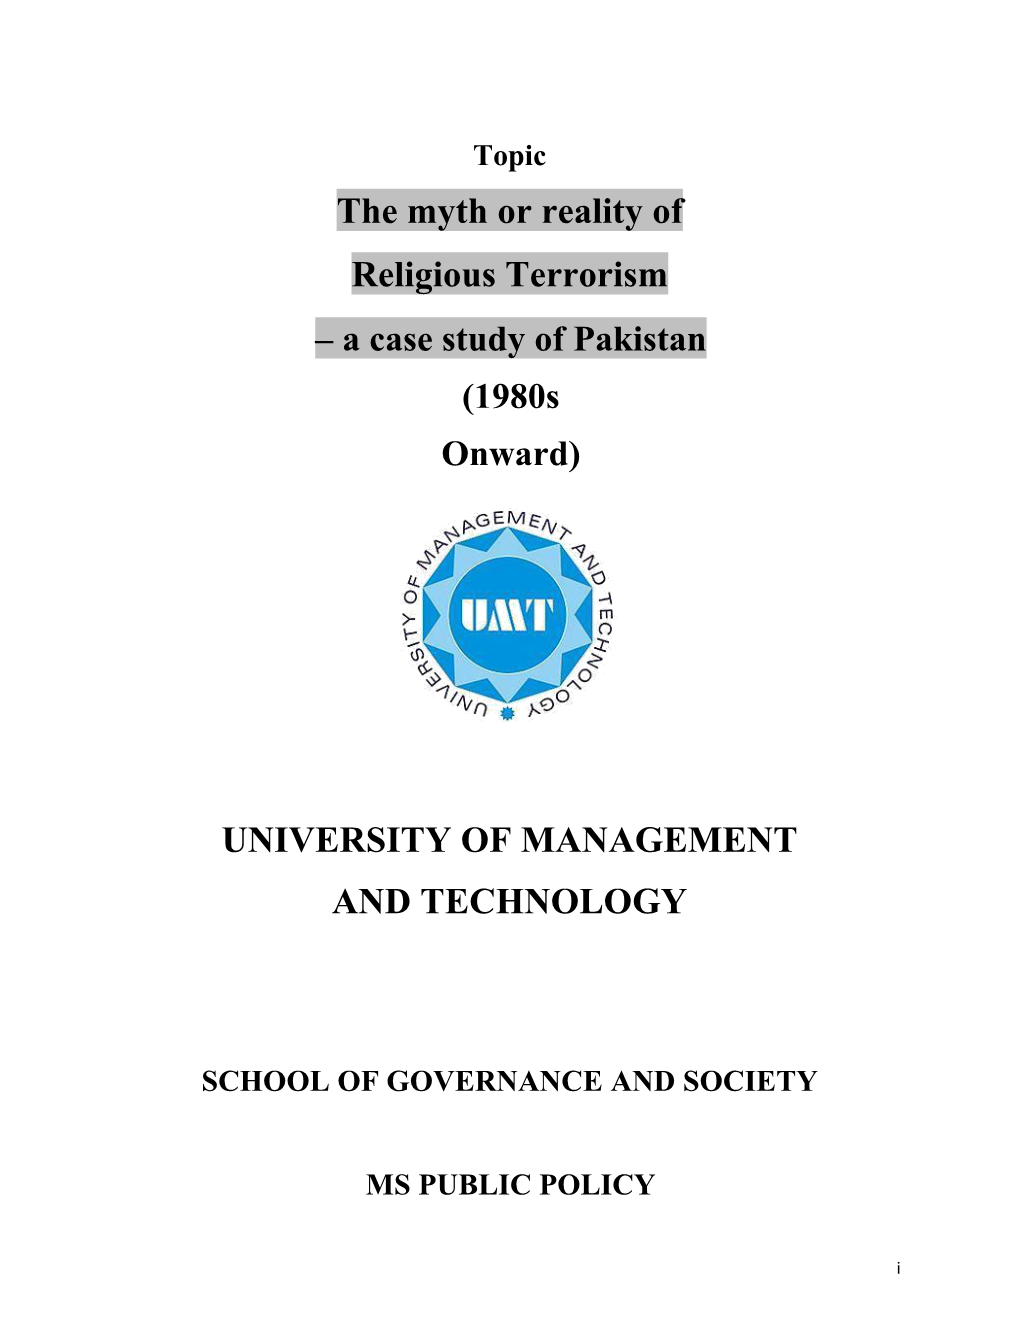 The Myth Or Reality of Religious Terrorism – a Case Study of Pakistan